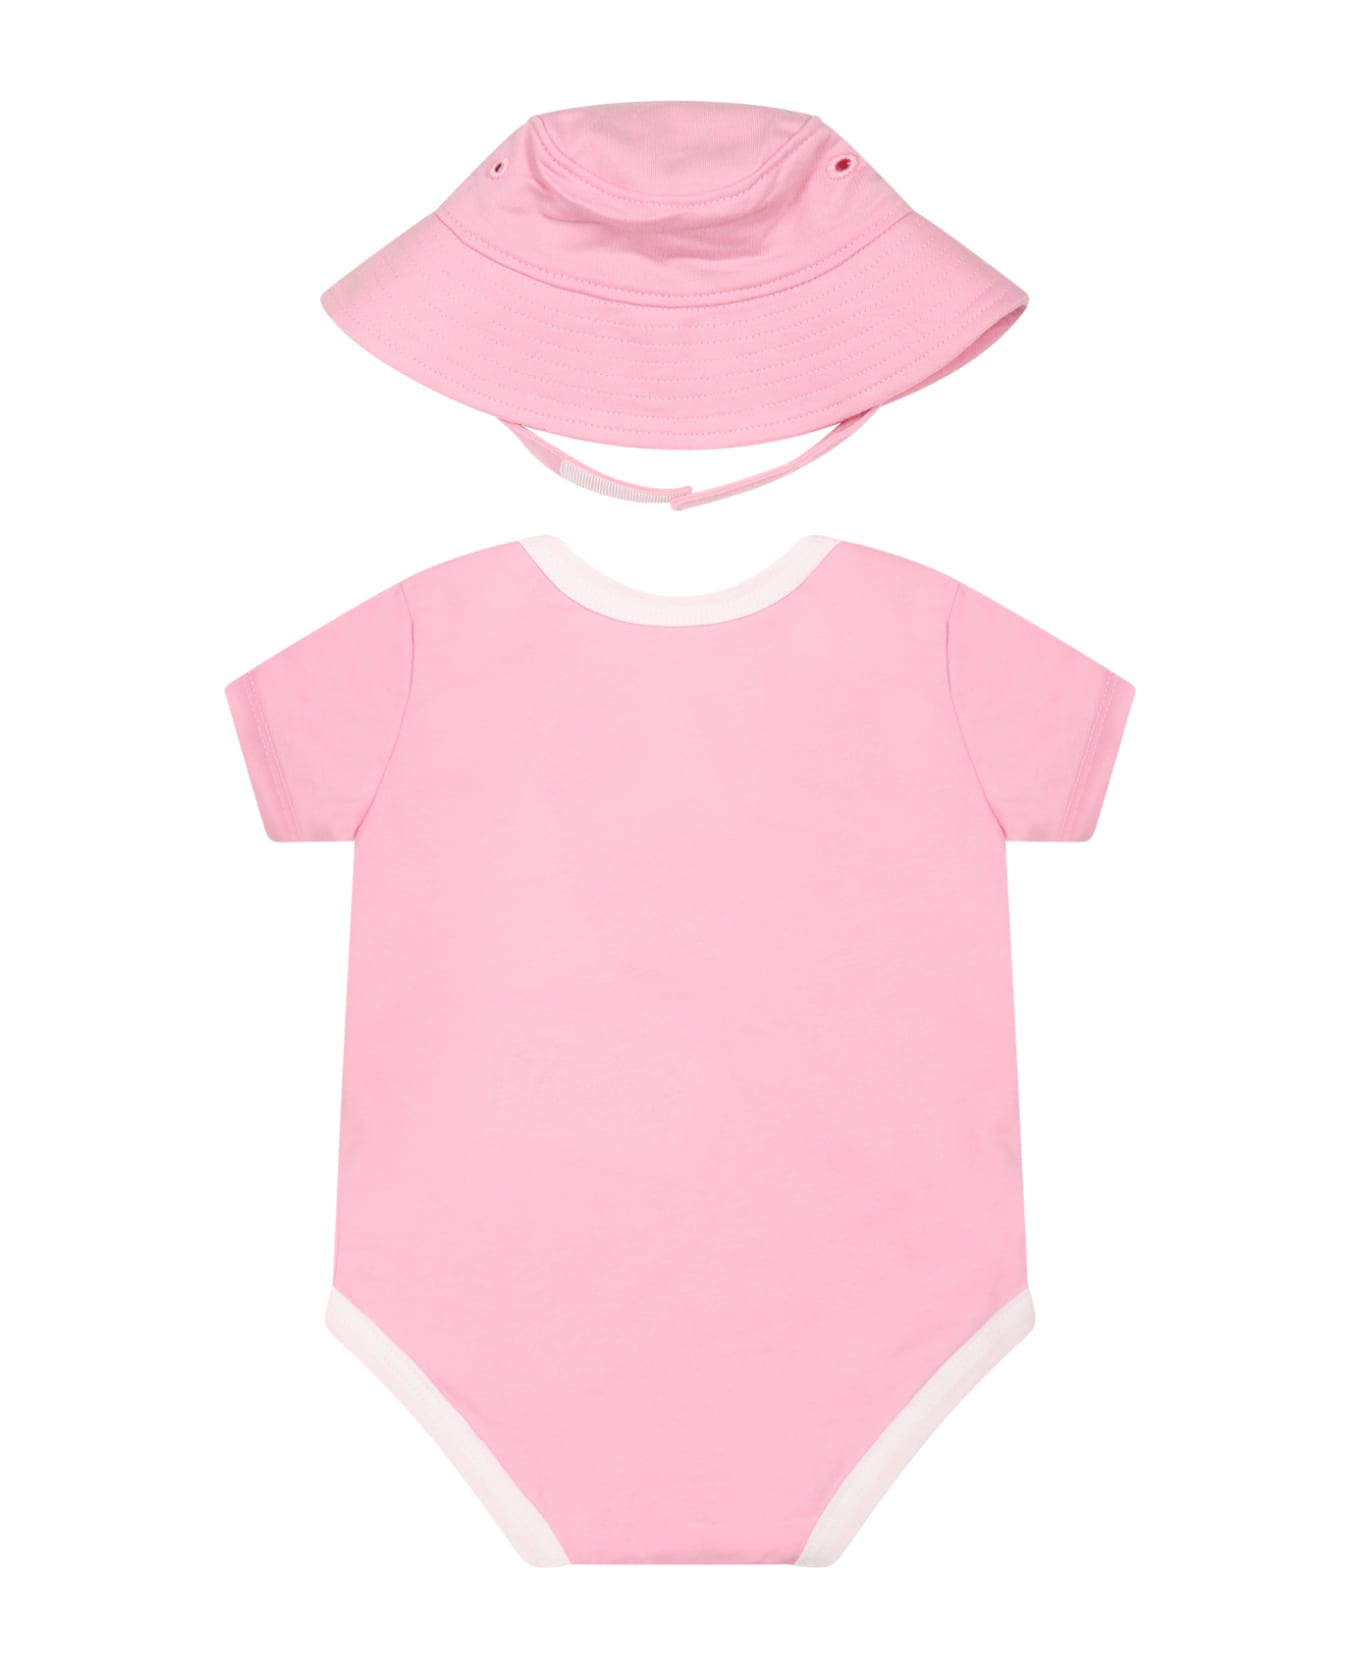 Nike Pink Set For Baby Girl With Iconic Swoosh - Pink